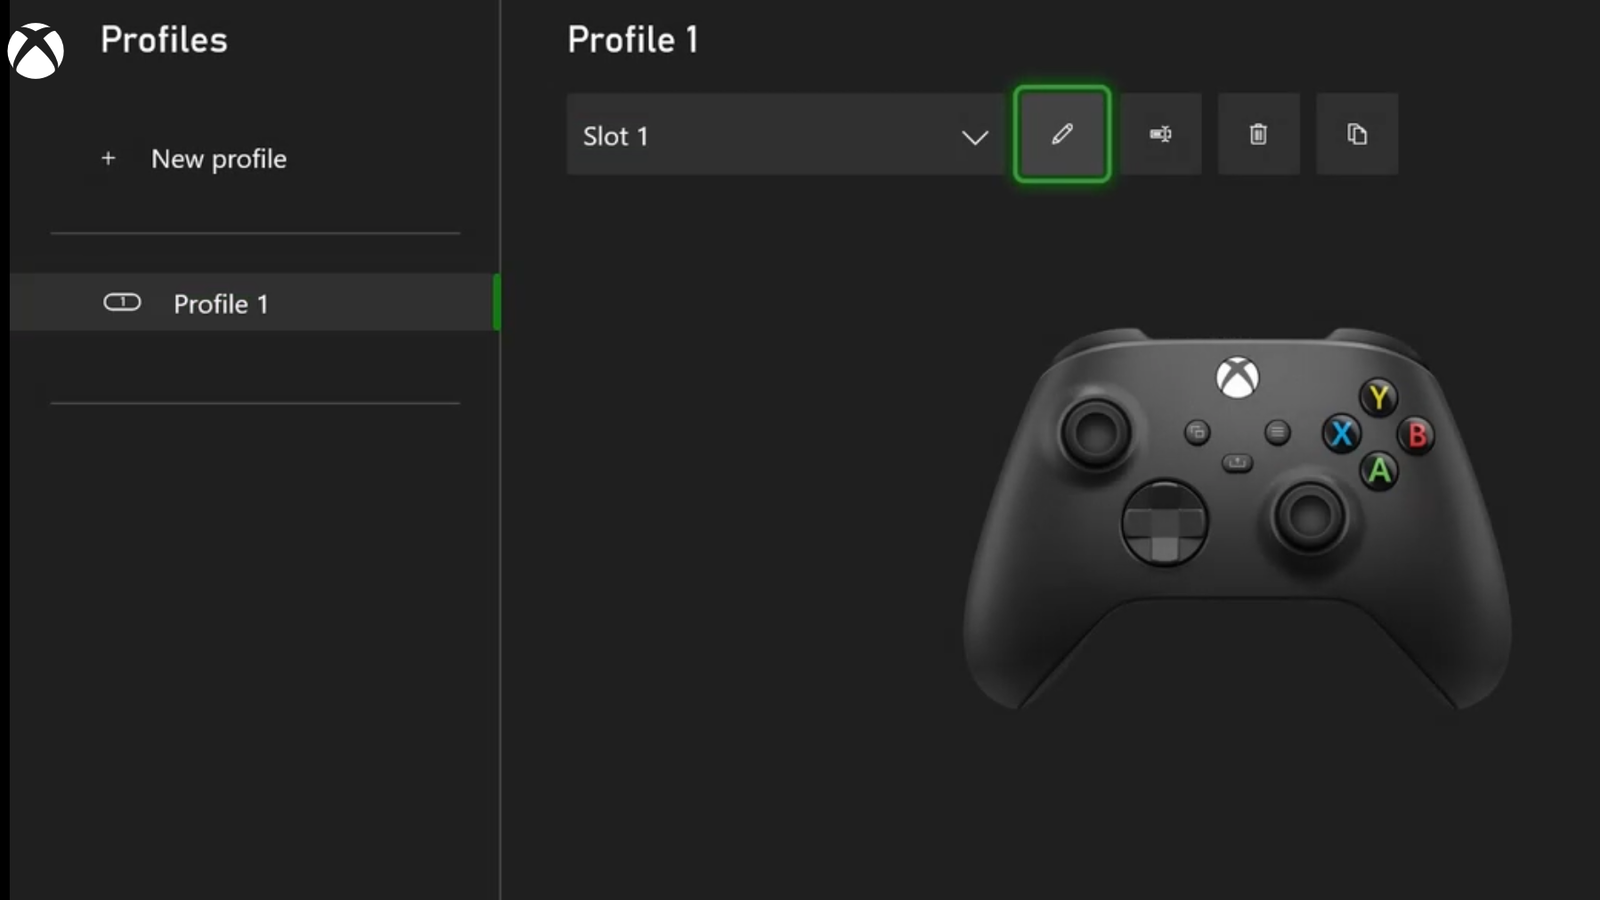 The pencil icon lets you access the option to disable vibration on Xbox controllers. (Screenshot: Pranay Parab)